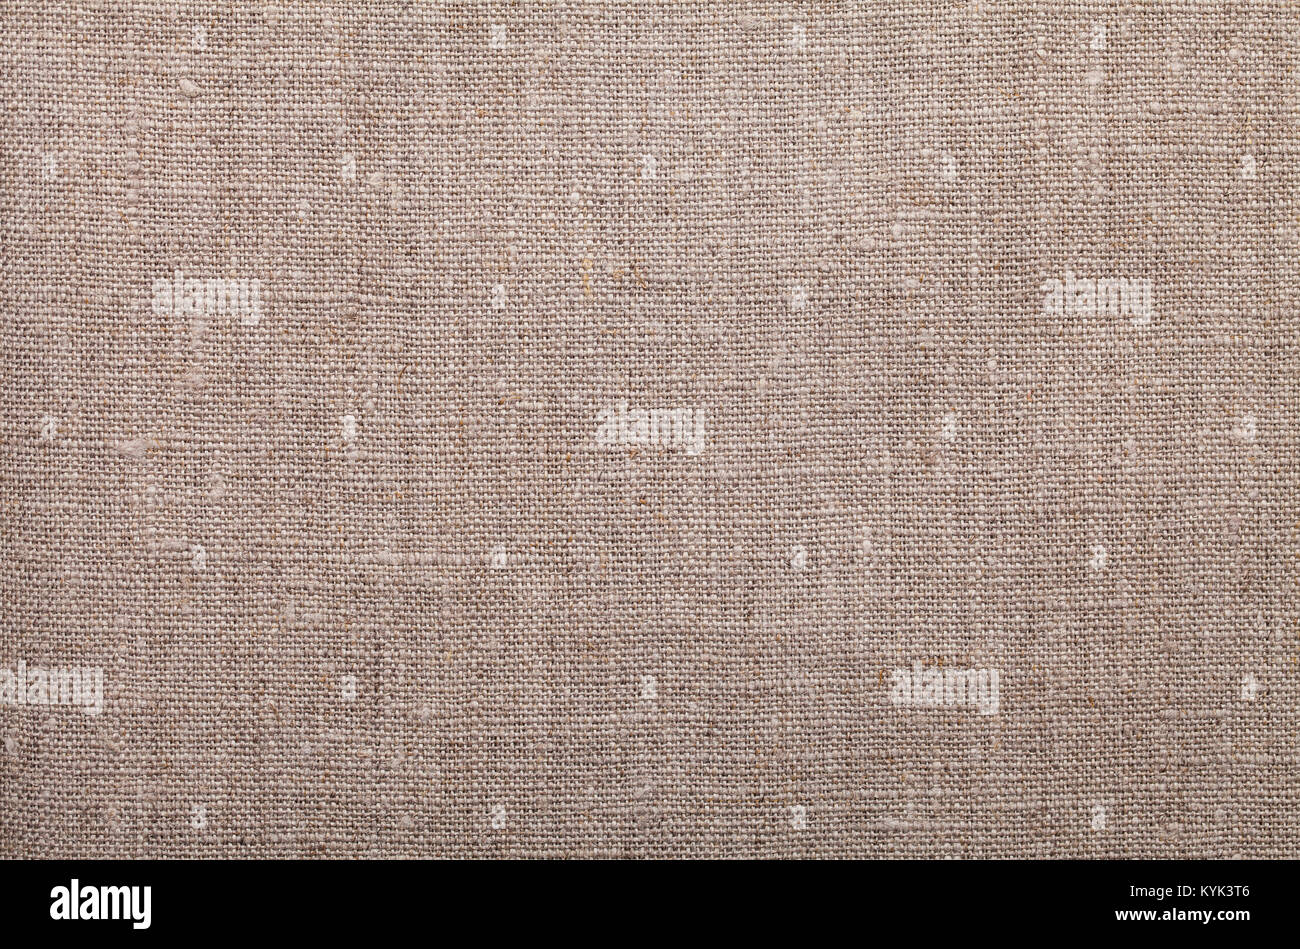 Natural linen texture. Canvas background Stock Photo